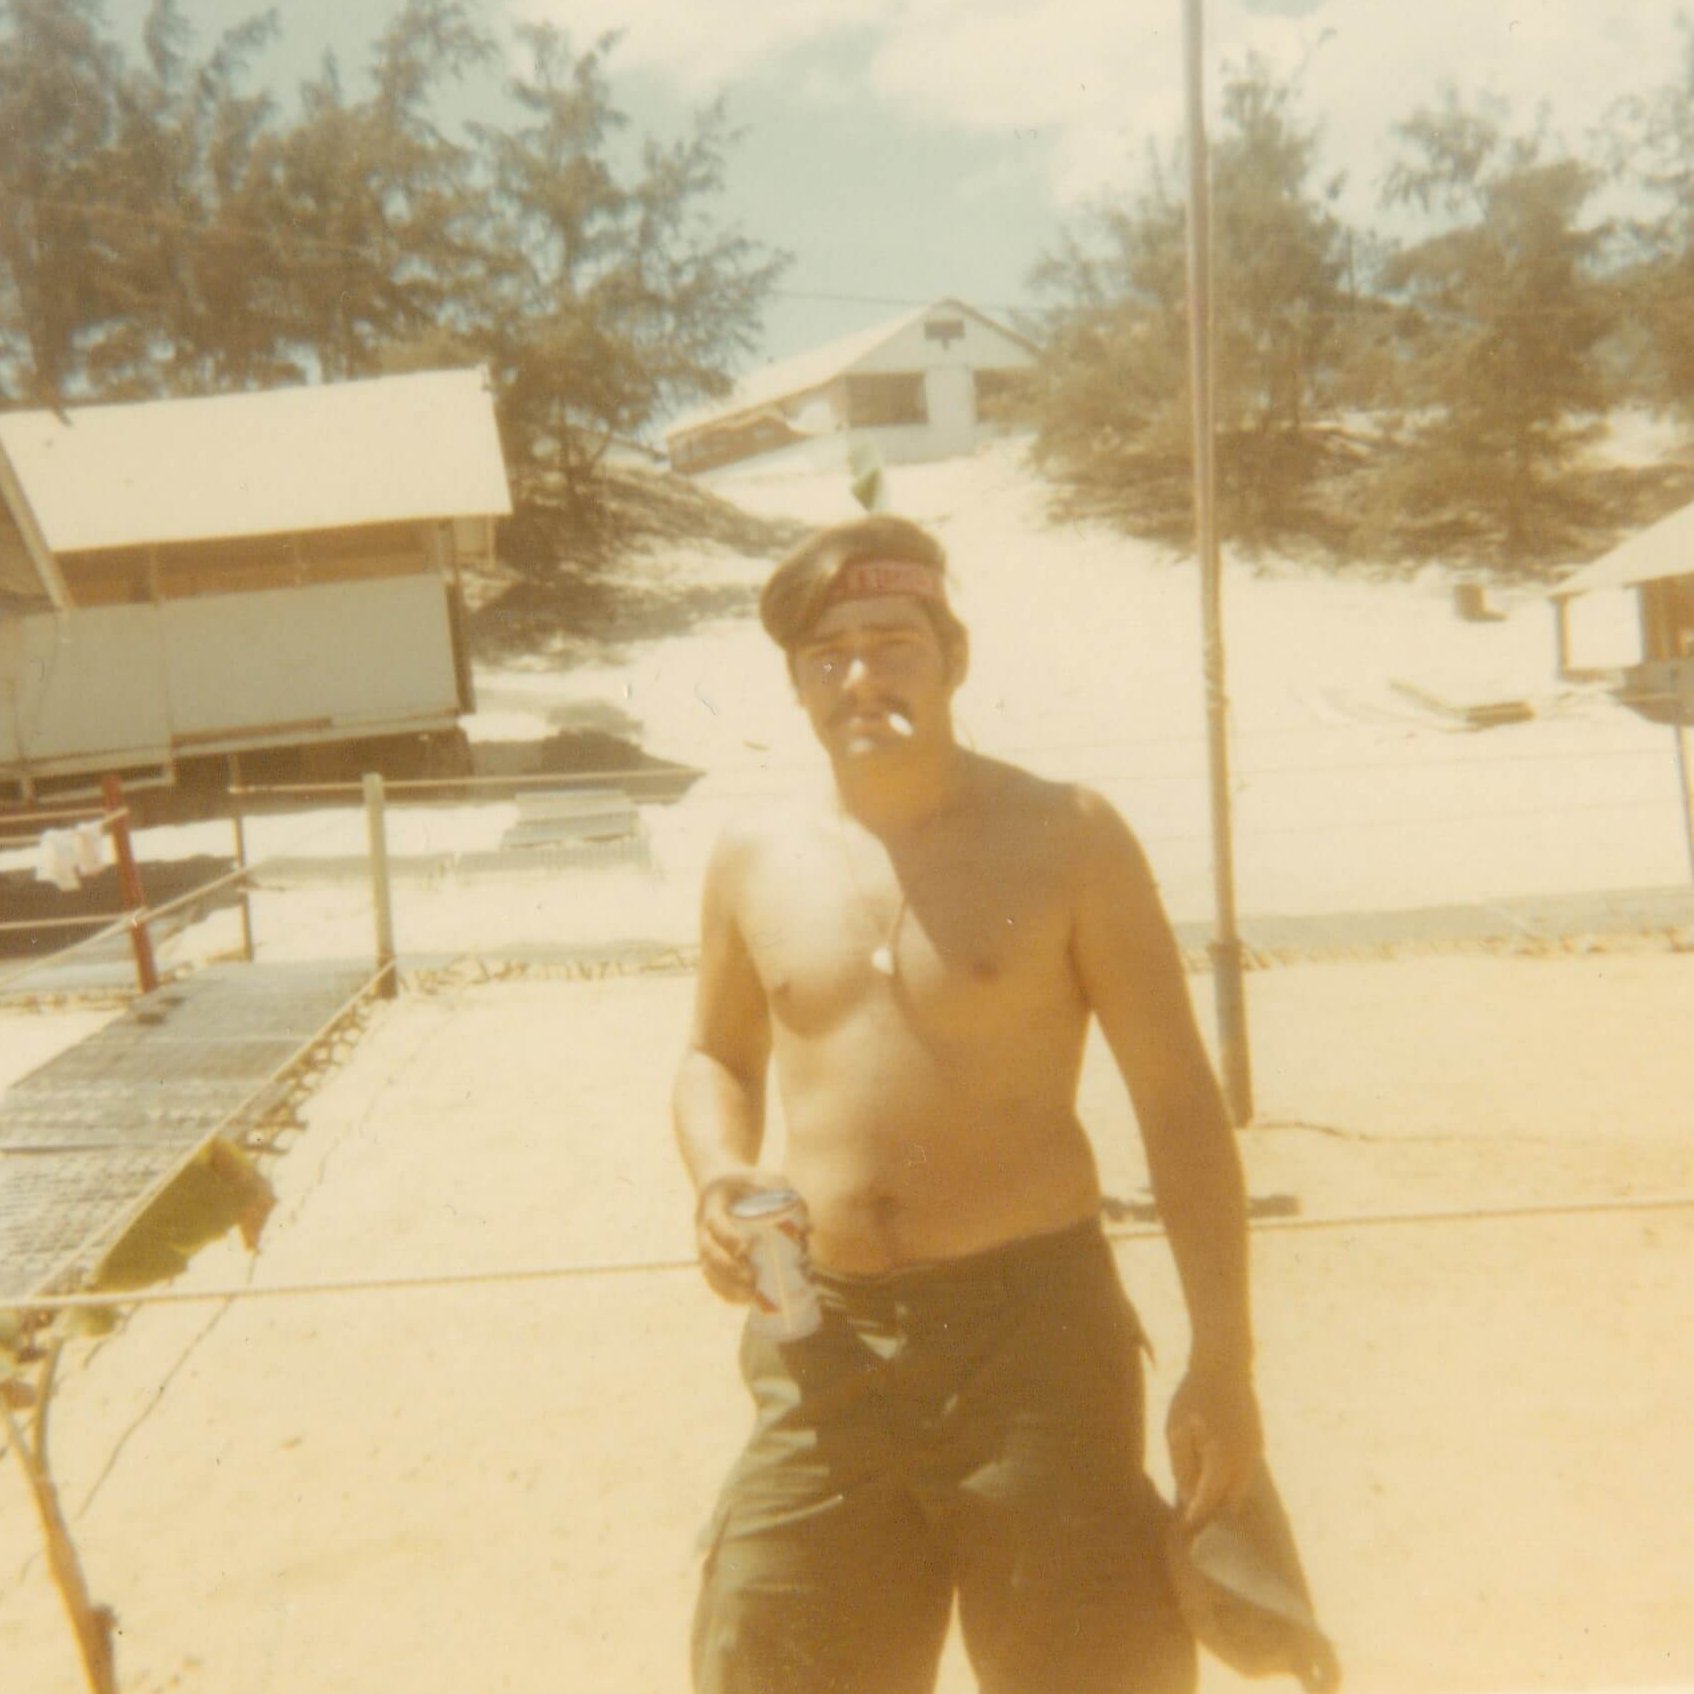 A shirtless soldier wearing a headband, smoking a cigarette, and holding a beer.